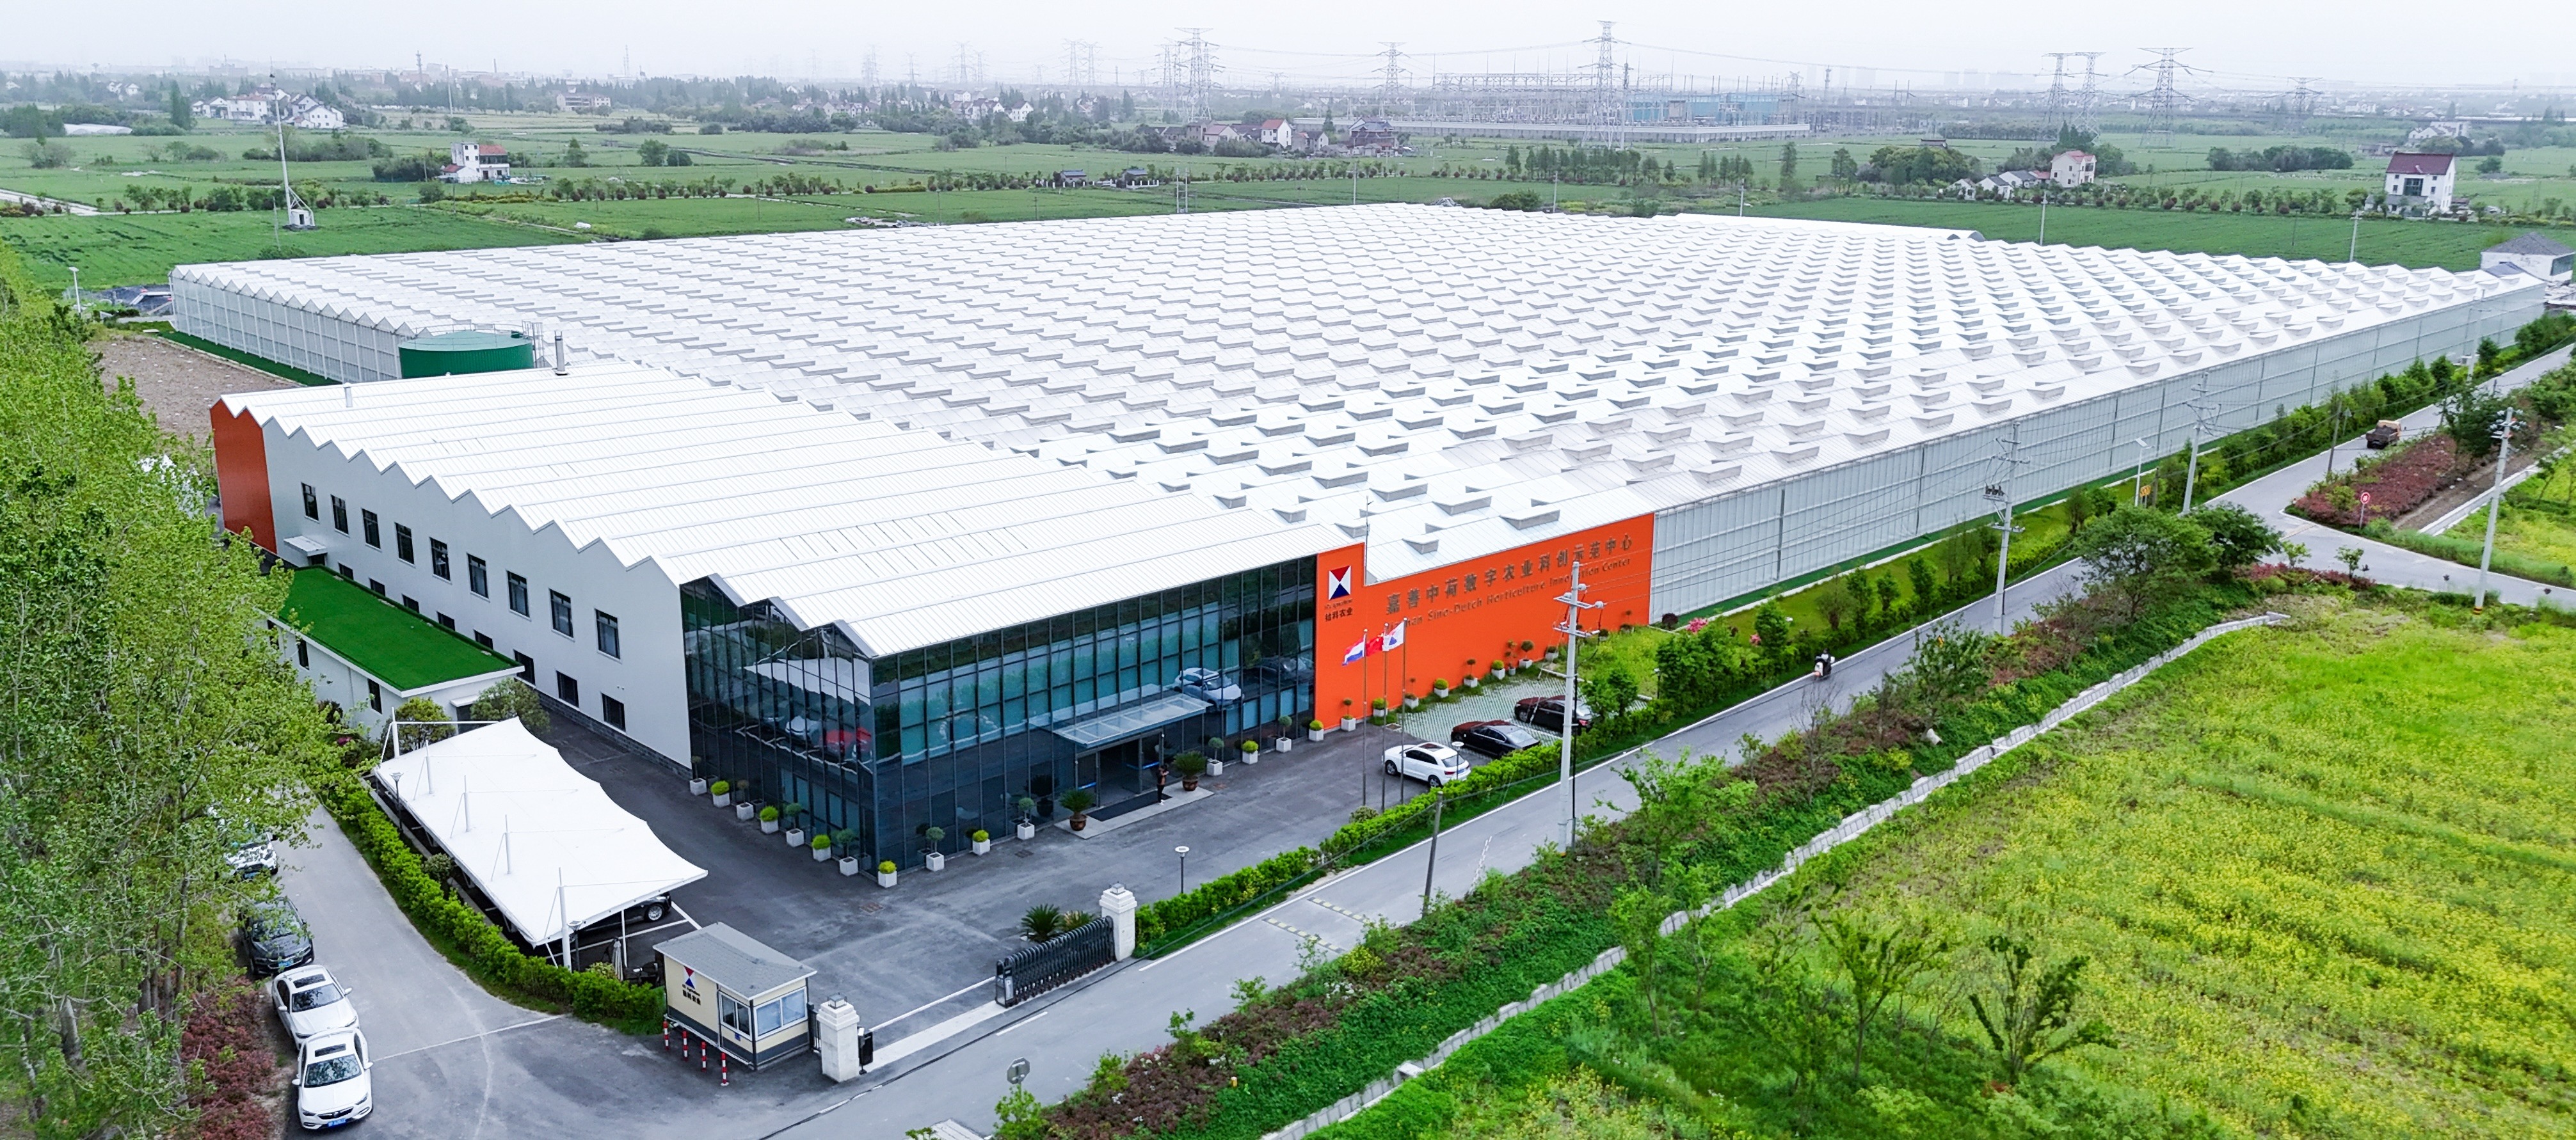 Jiashan Sino-Dutch Agricultural Digital Science and Innovation Demonstration Center building from above